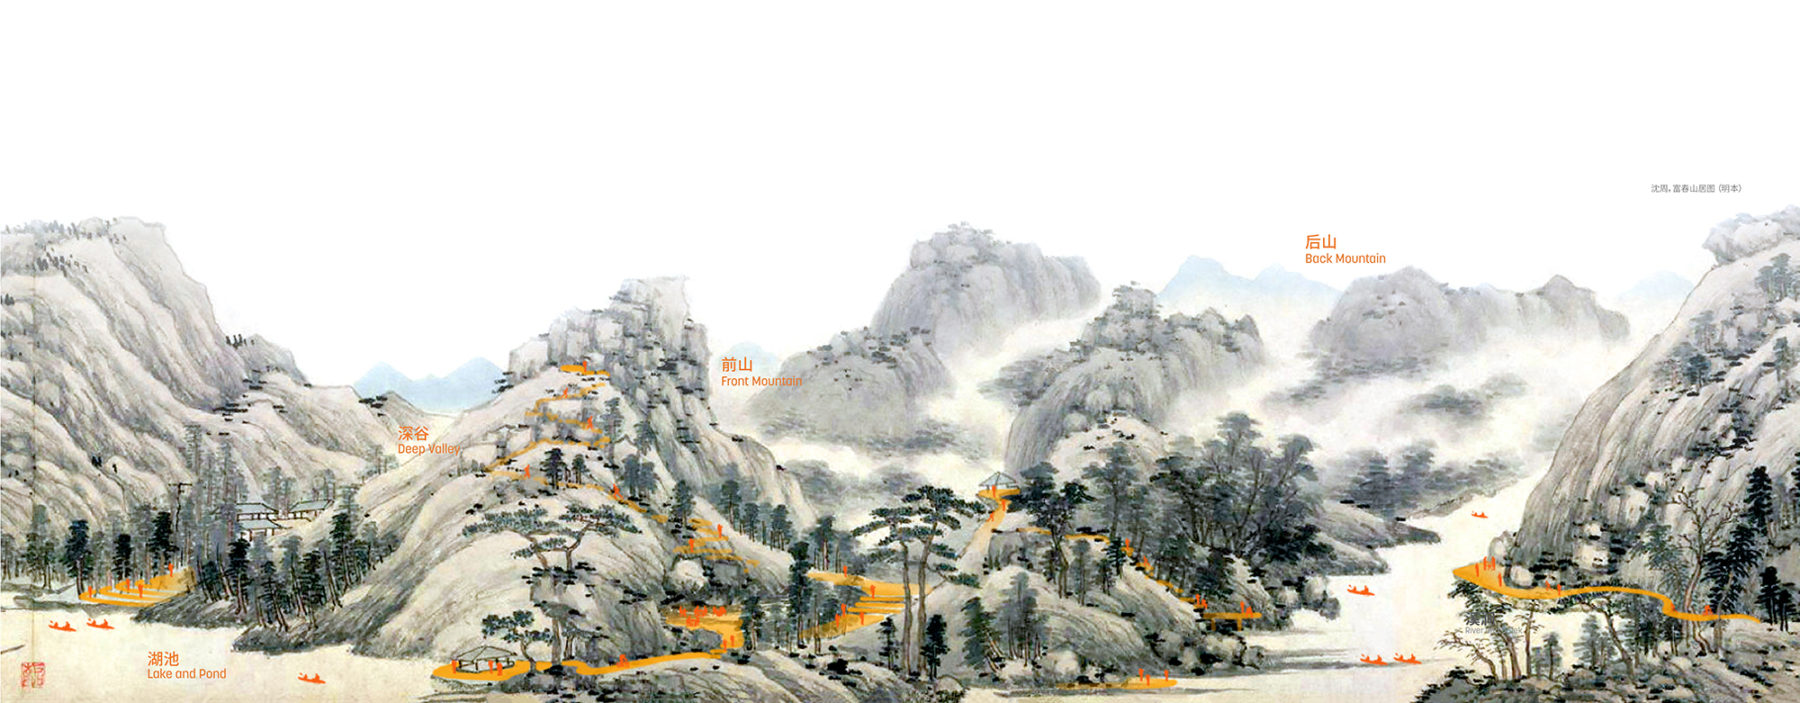 inspirational illustration of chinese mountains